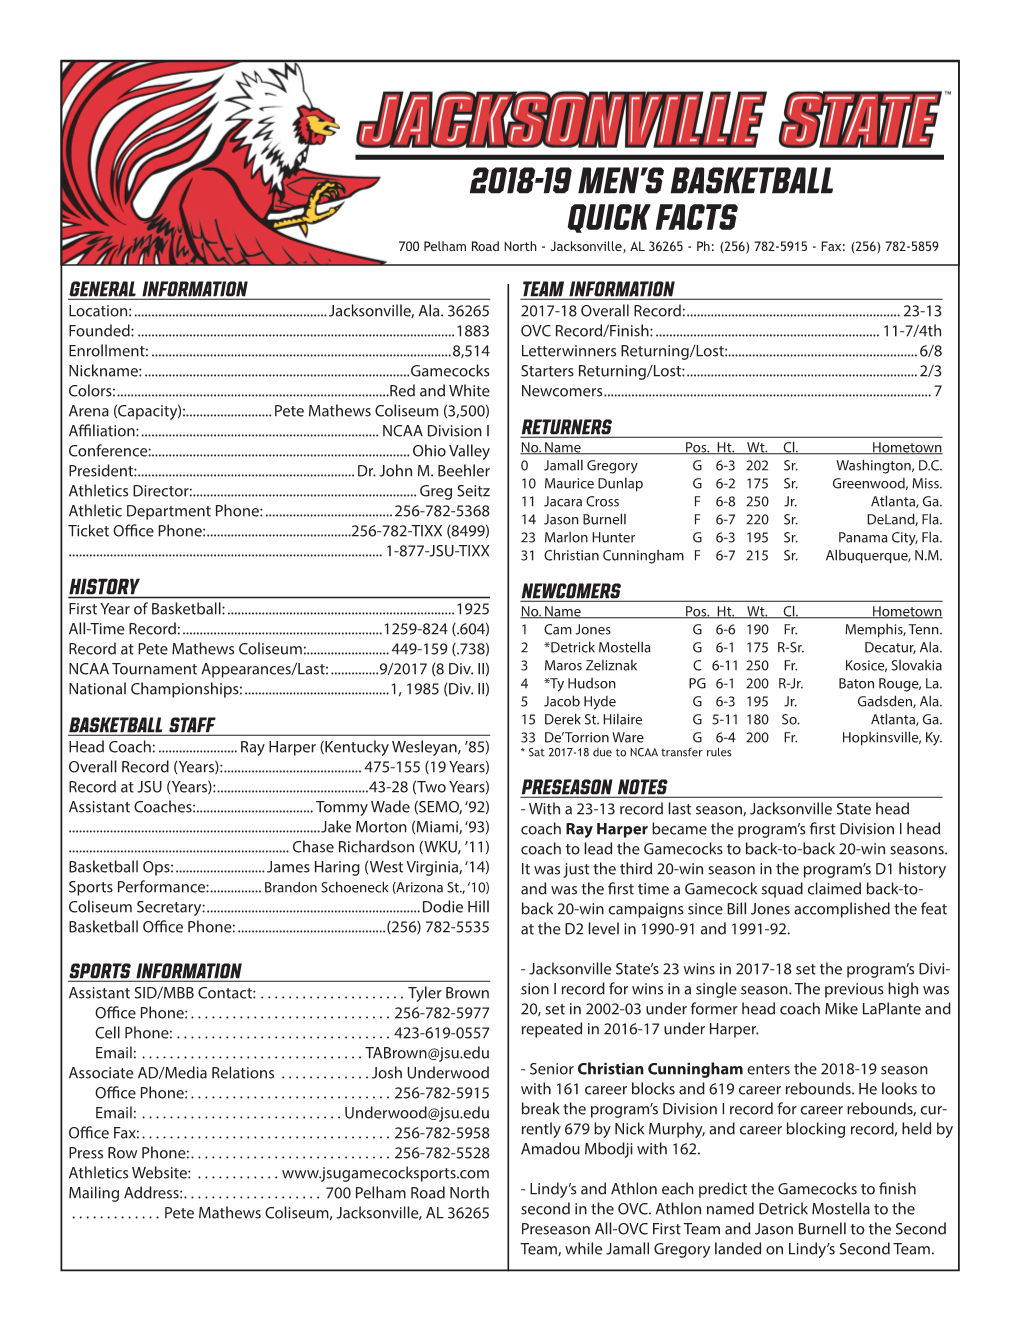 2018-19 Men's Basketball Quick Facts